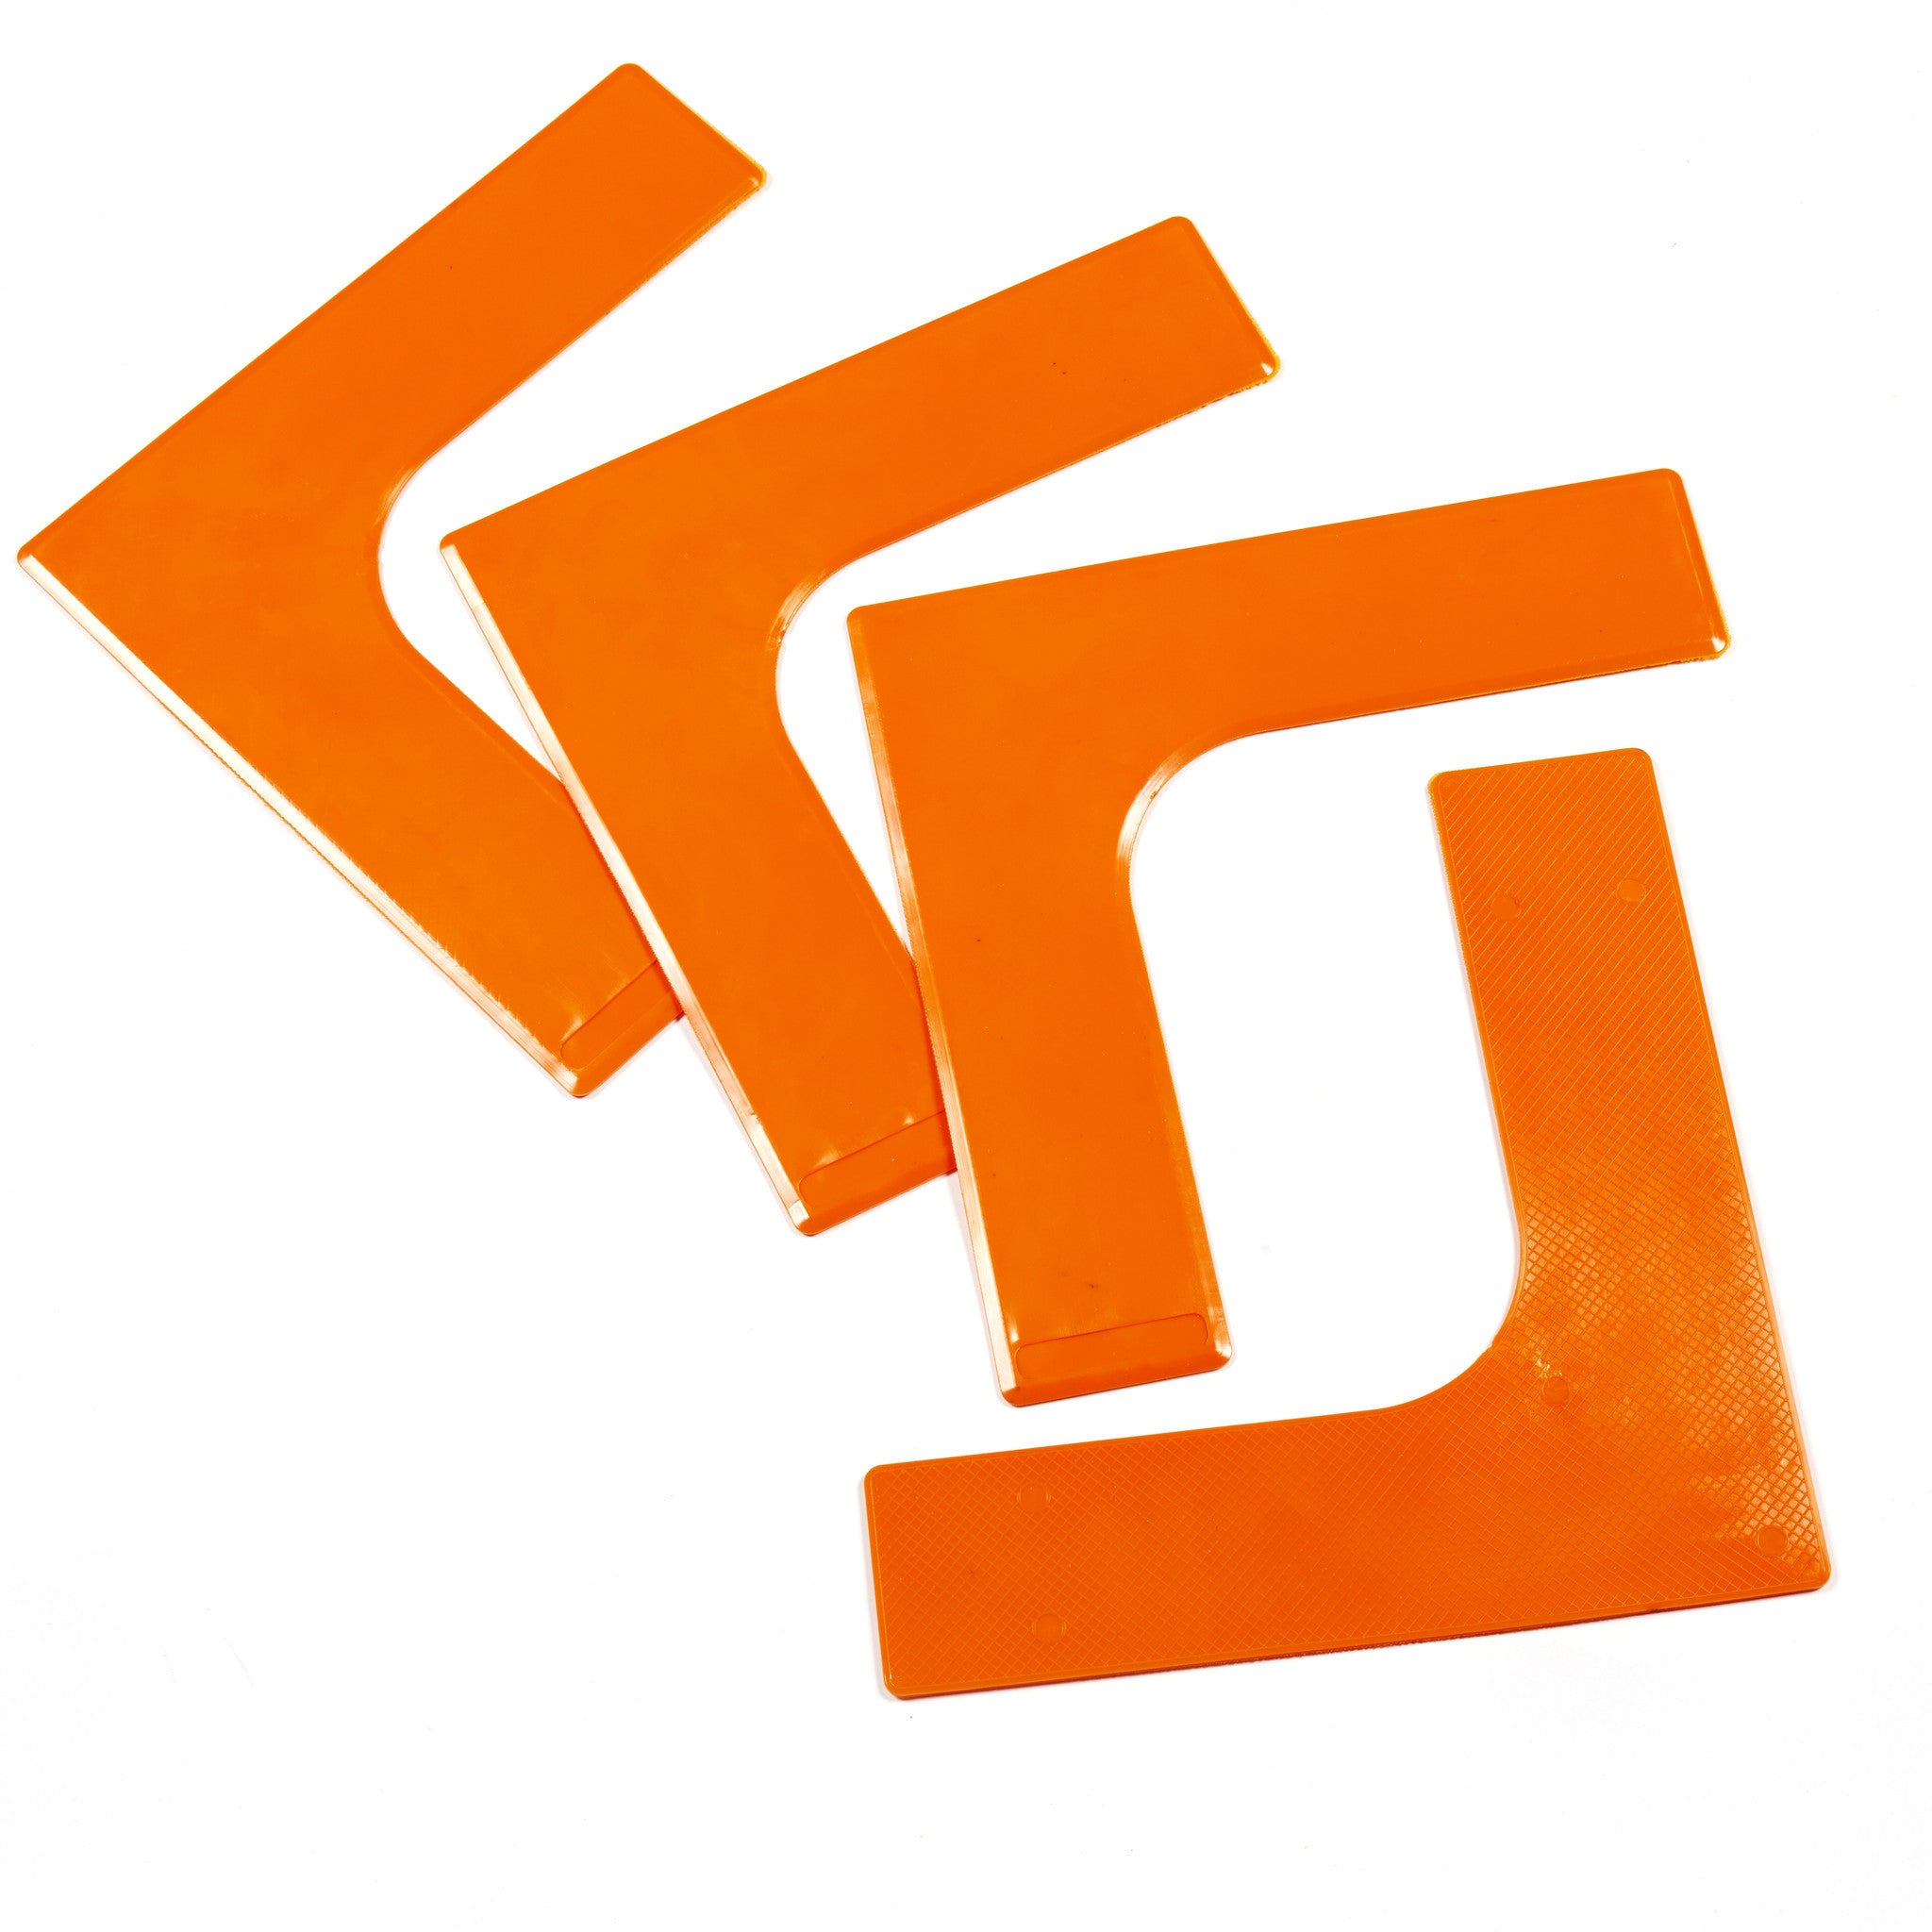 Set of 4 sports corner markers. Bright orange Throw Down tennis court or sports pitch markers.